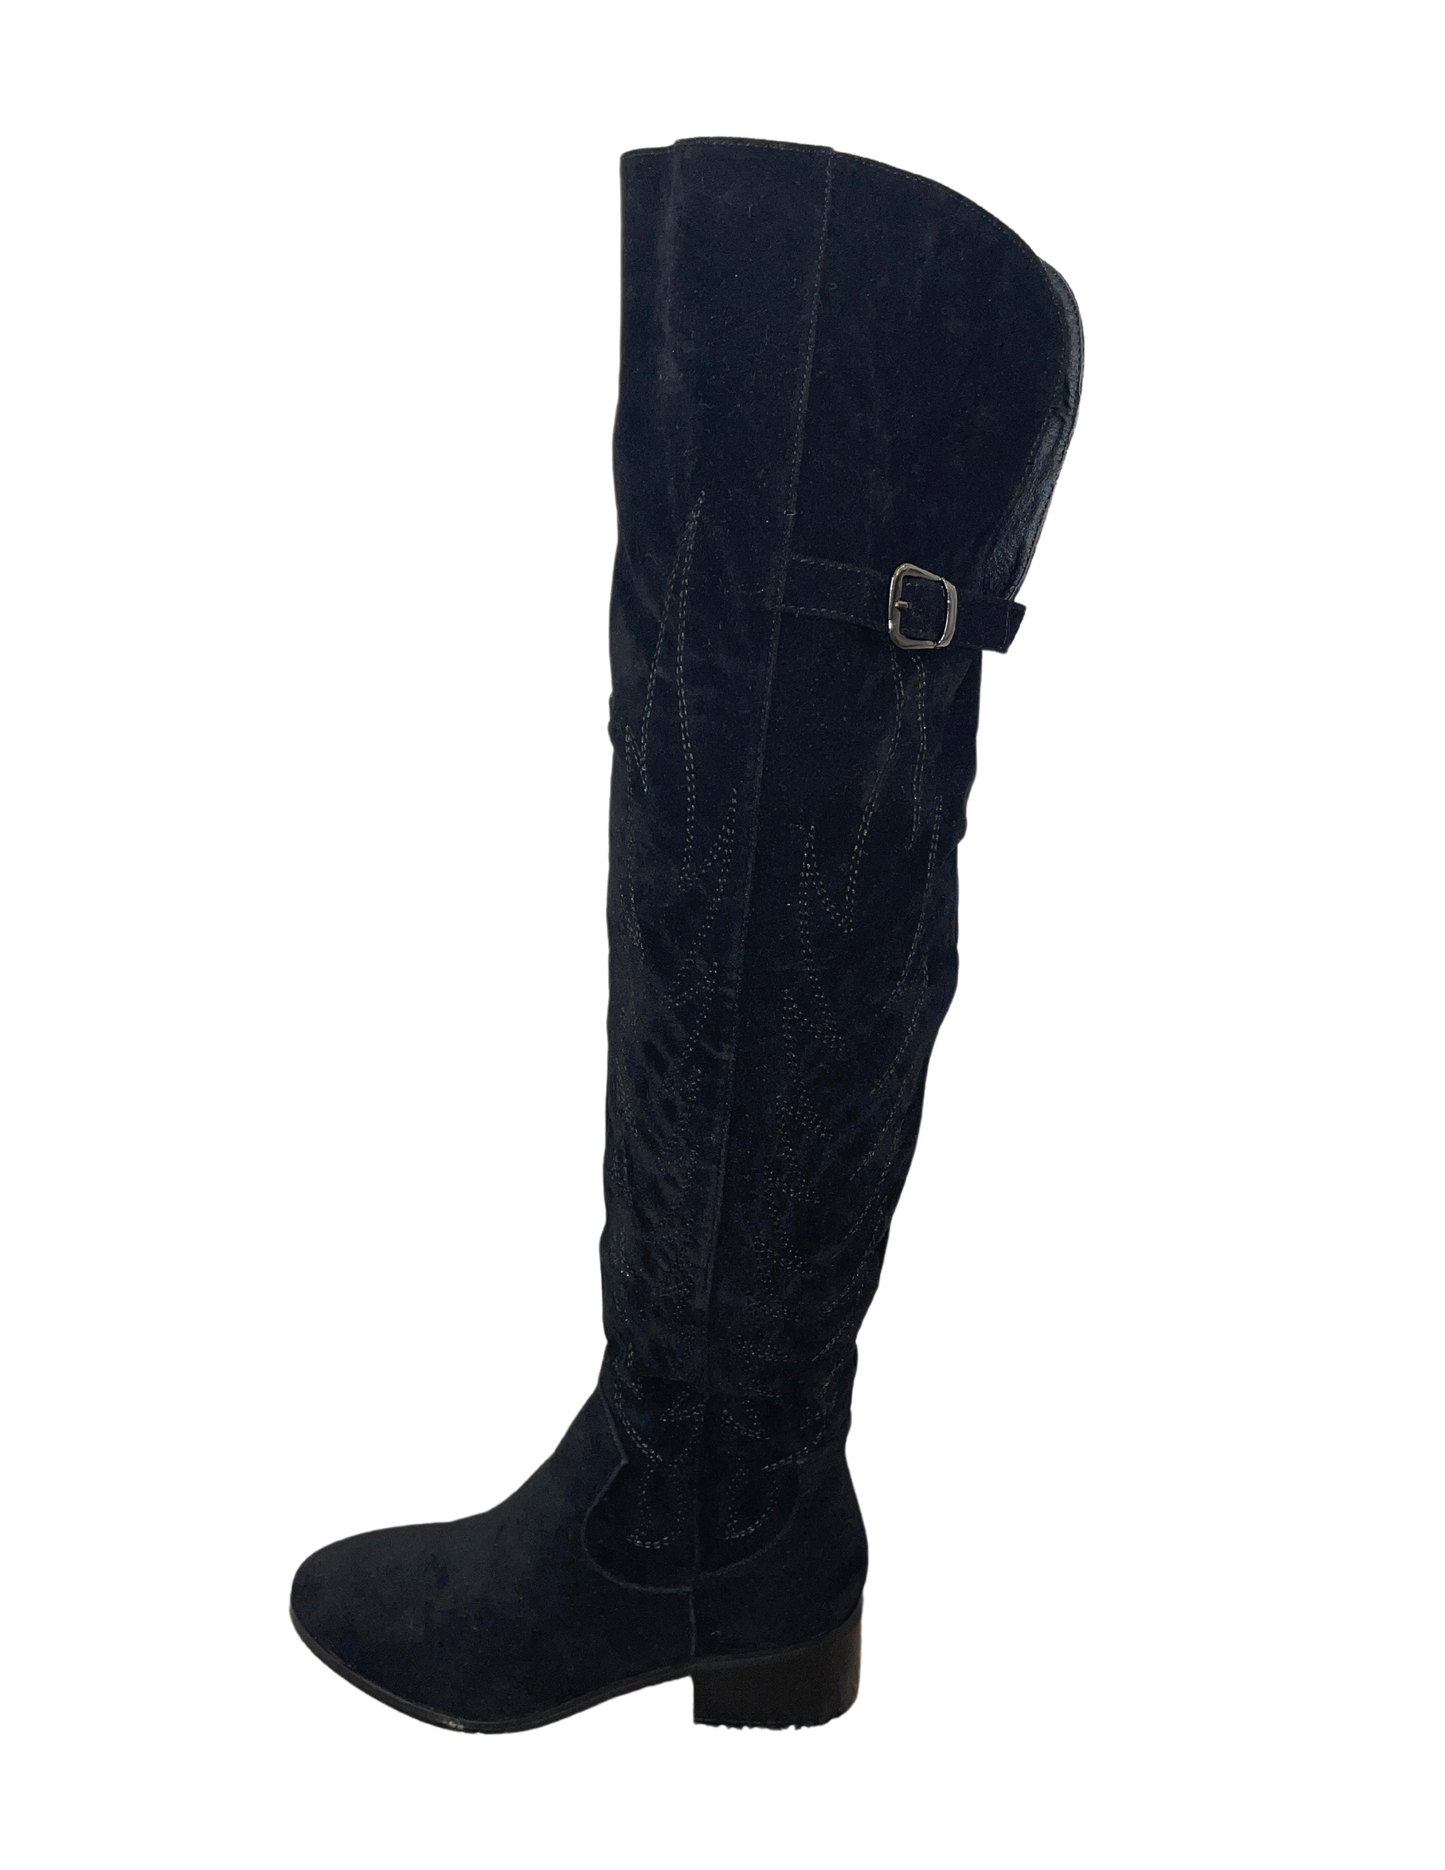 Rustic Glam Thigh High Boots Black